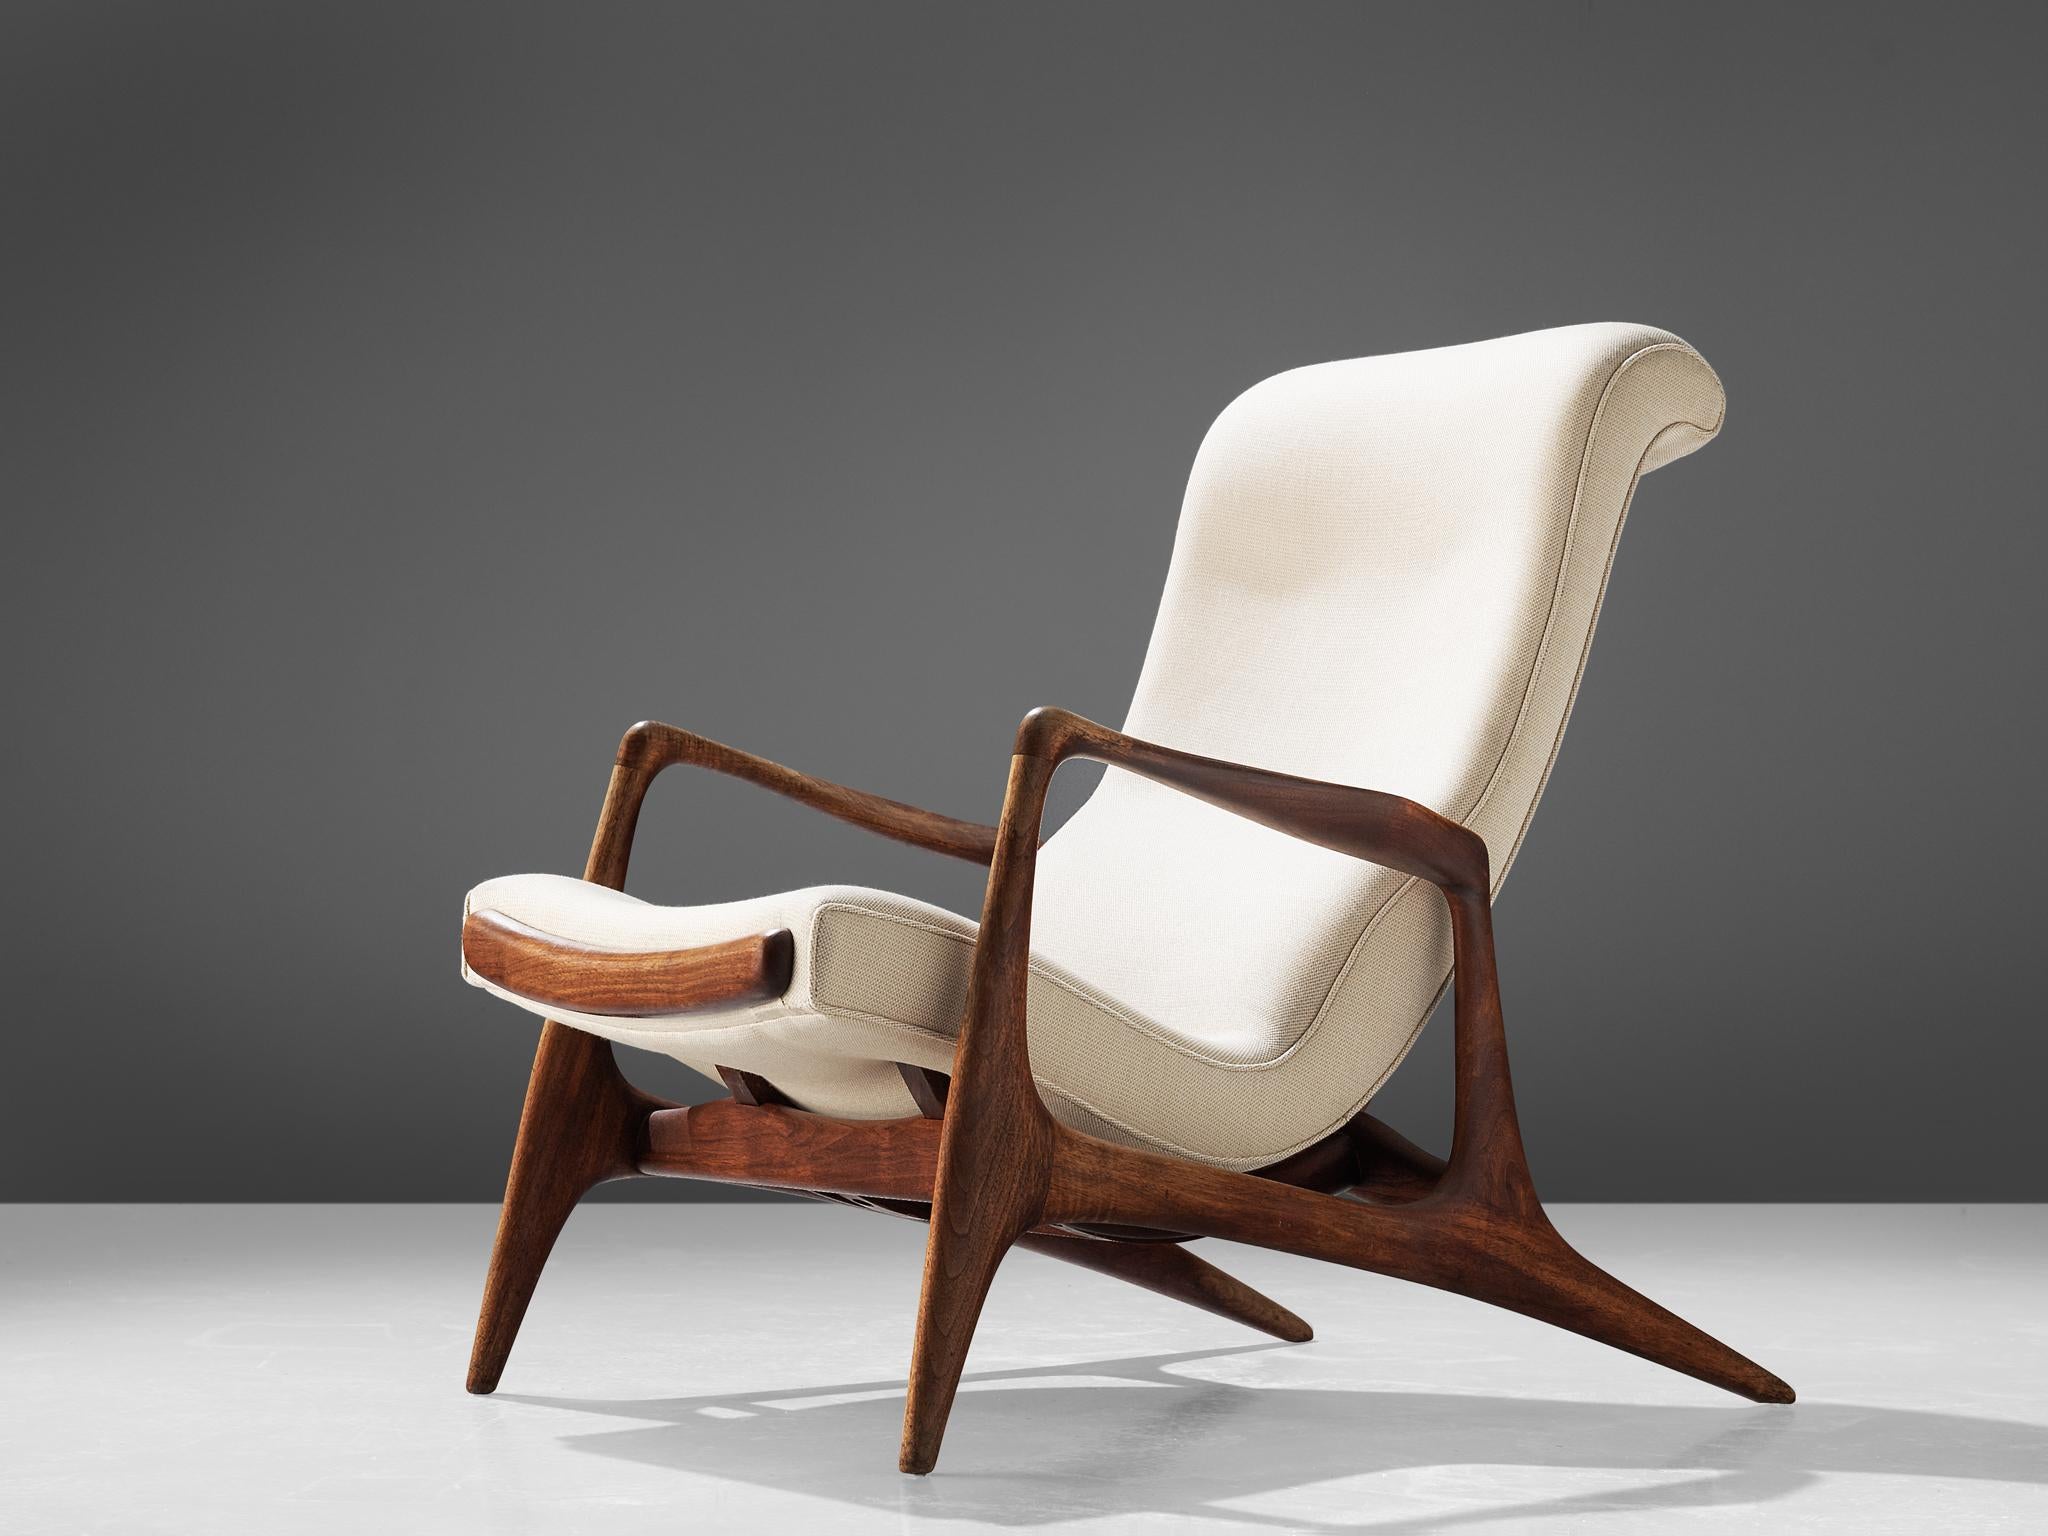 Vladimir Kagan for Dreyfuss, 'Contour' chair, teak and ivory fabric, United States, 1950s.

This lounge chair by Kagan is sculptural and delicate. The frame, executed in teak and carved and detailed in an exquisite manner. The back legs are long